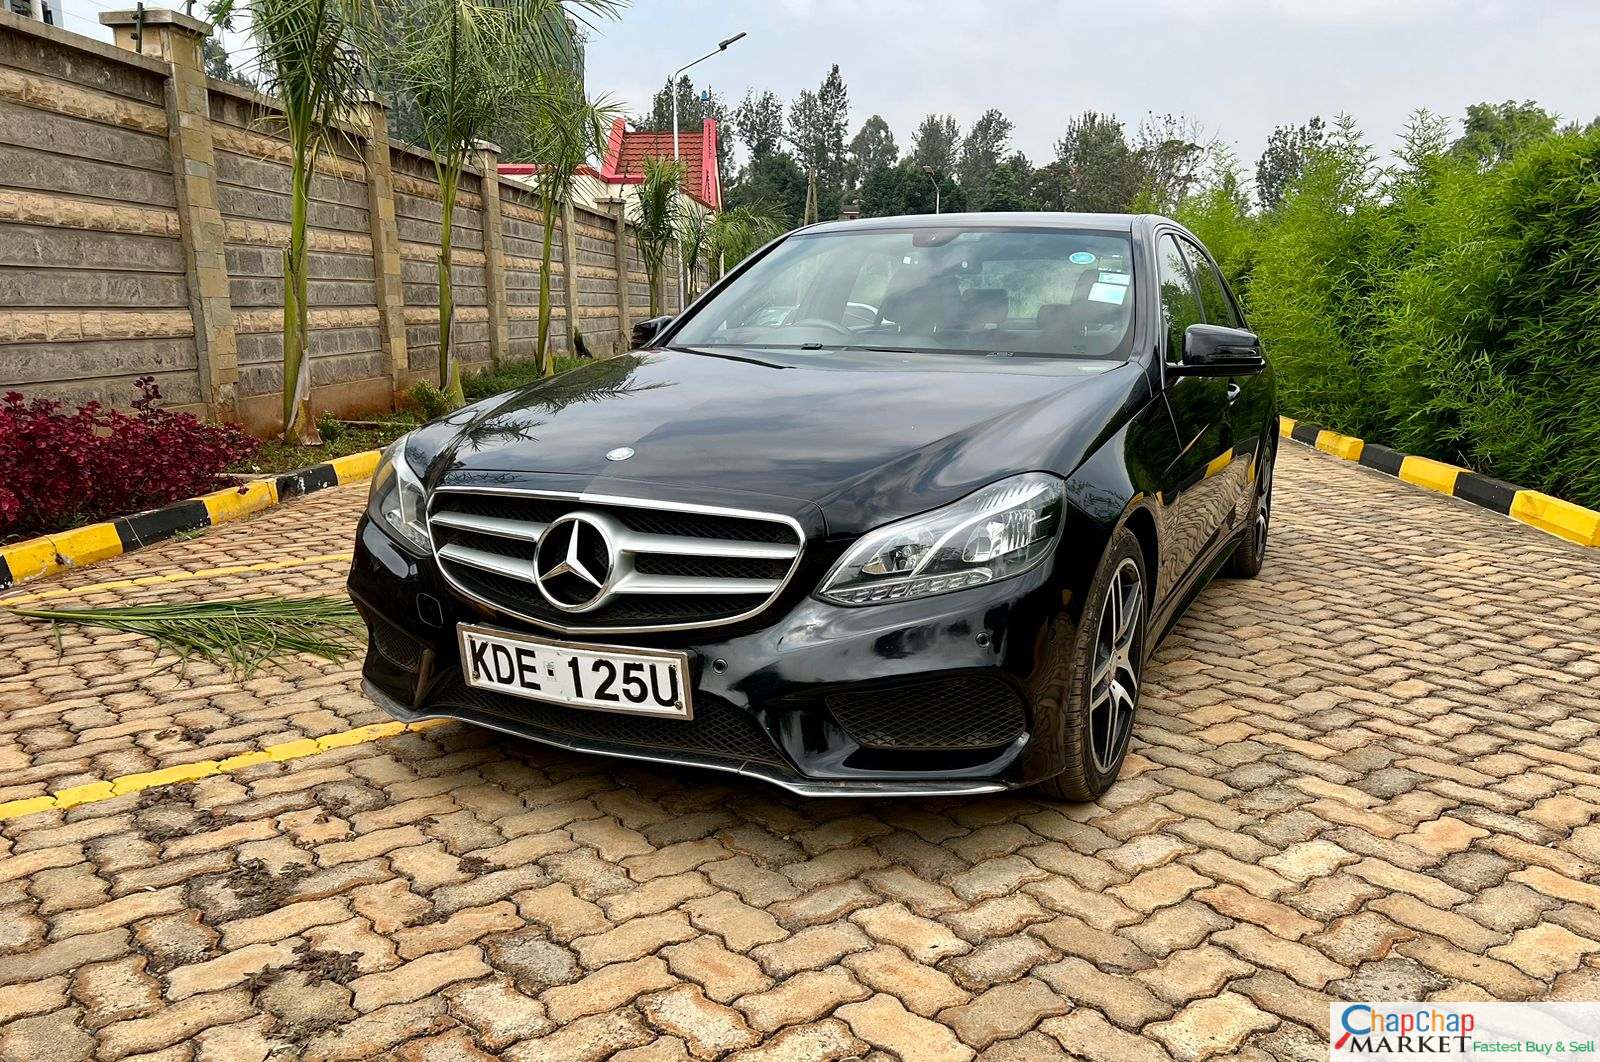 Mercedes Benz E220 kenya Cheapest You Pay 30% DEPOSIT E220 for sale in kenya hire purchase installments e220 diesel Trade in OK